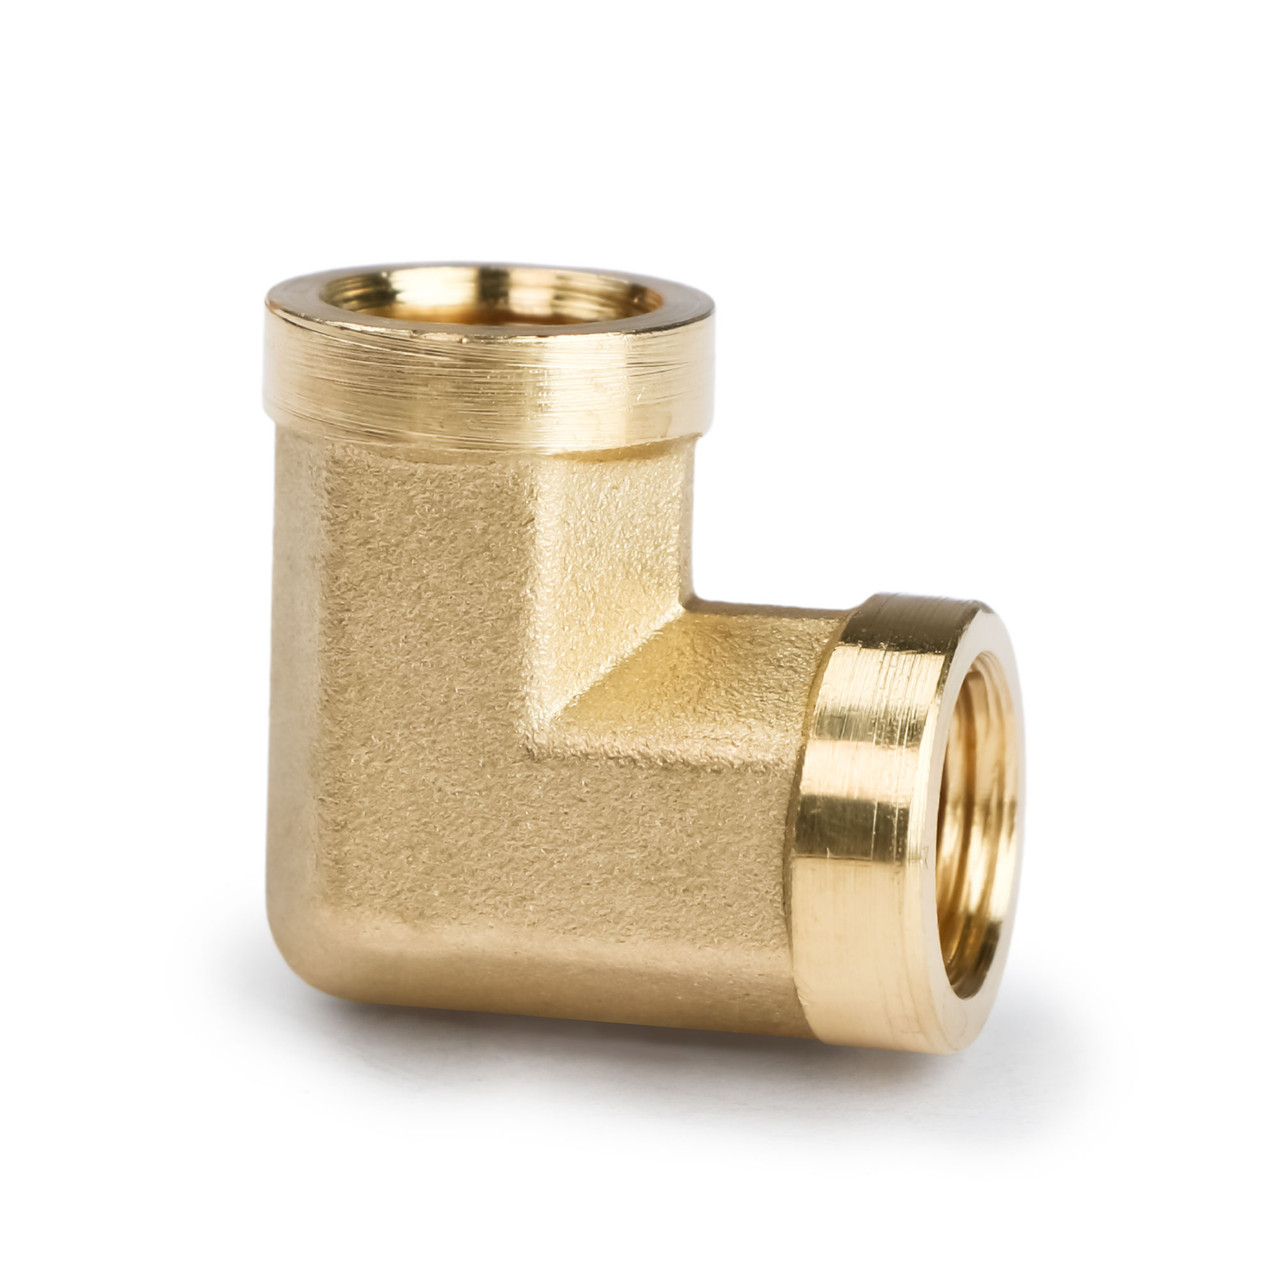 U.S. Solid 2pcs 90 Degree Barstock Street Elbow Brass Pipe Fitting 1/8 NPT Female  Pipe to 1/8 NPT Female - U.S. Solid